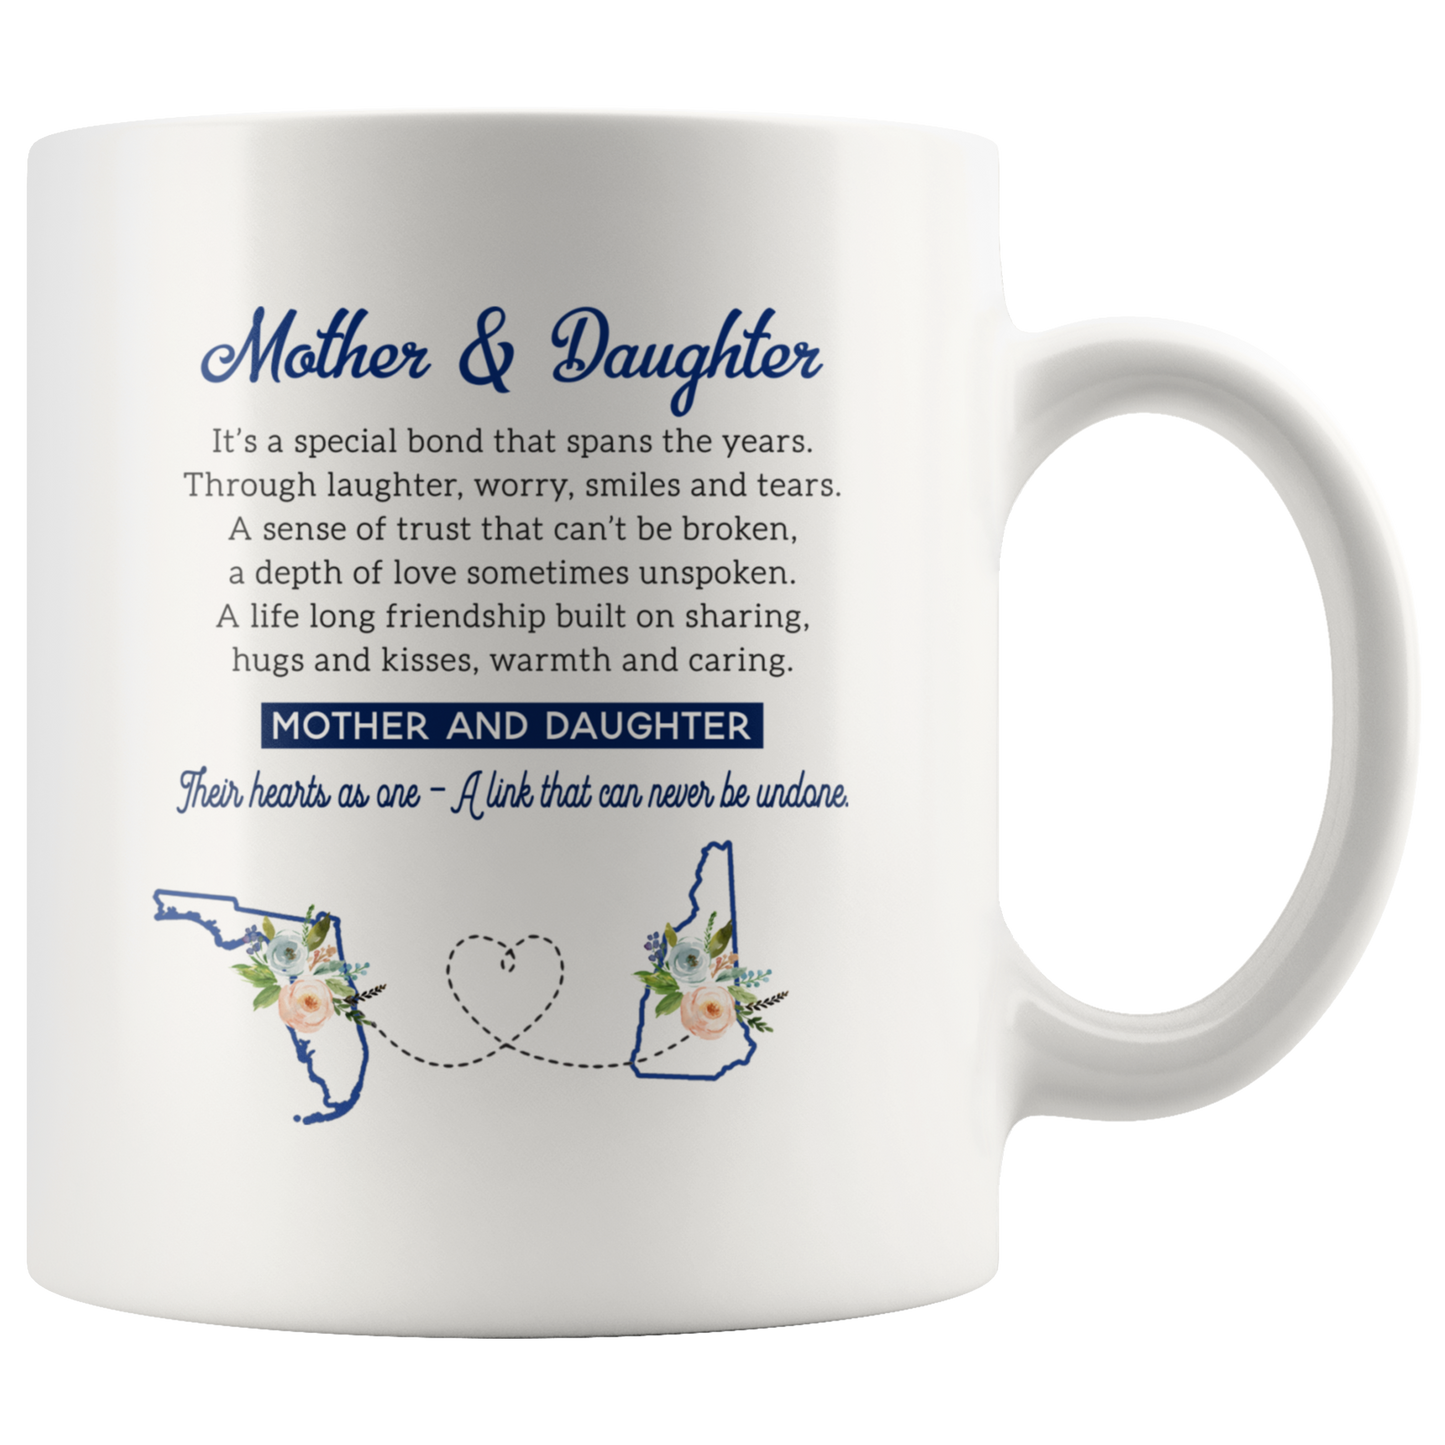 ND-21357591-sp-23742 - [ Florida | New Hampshire ]Long Distance Mom And Daughter Gifts - Mother And Daughter.